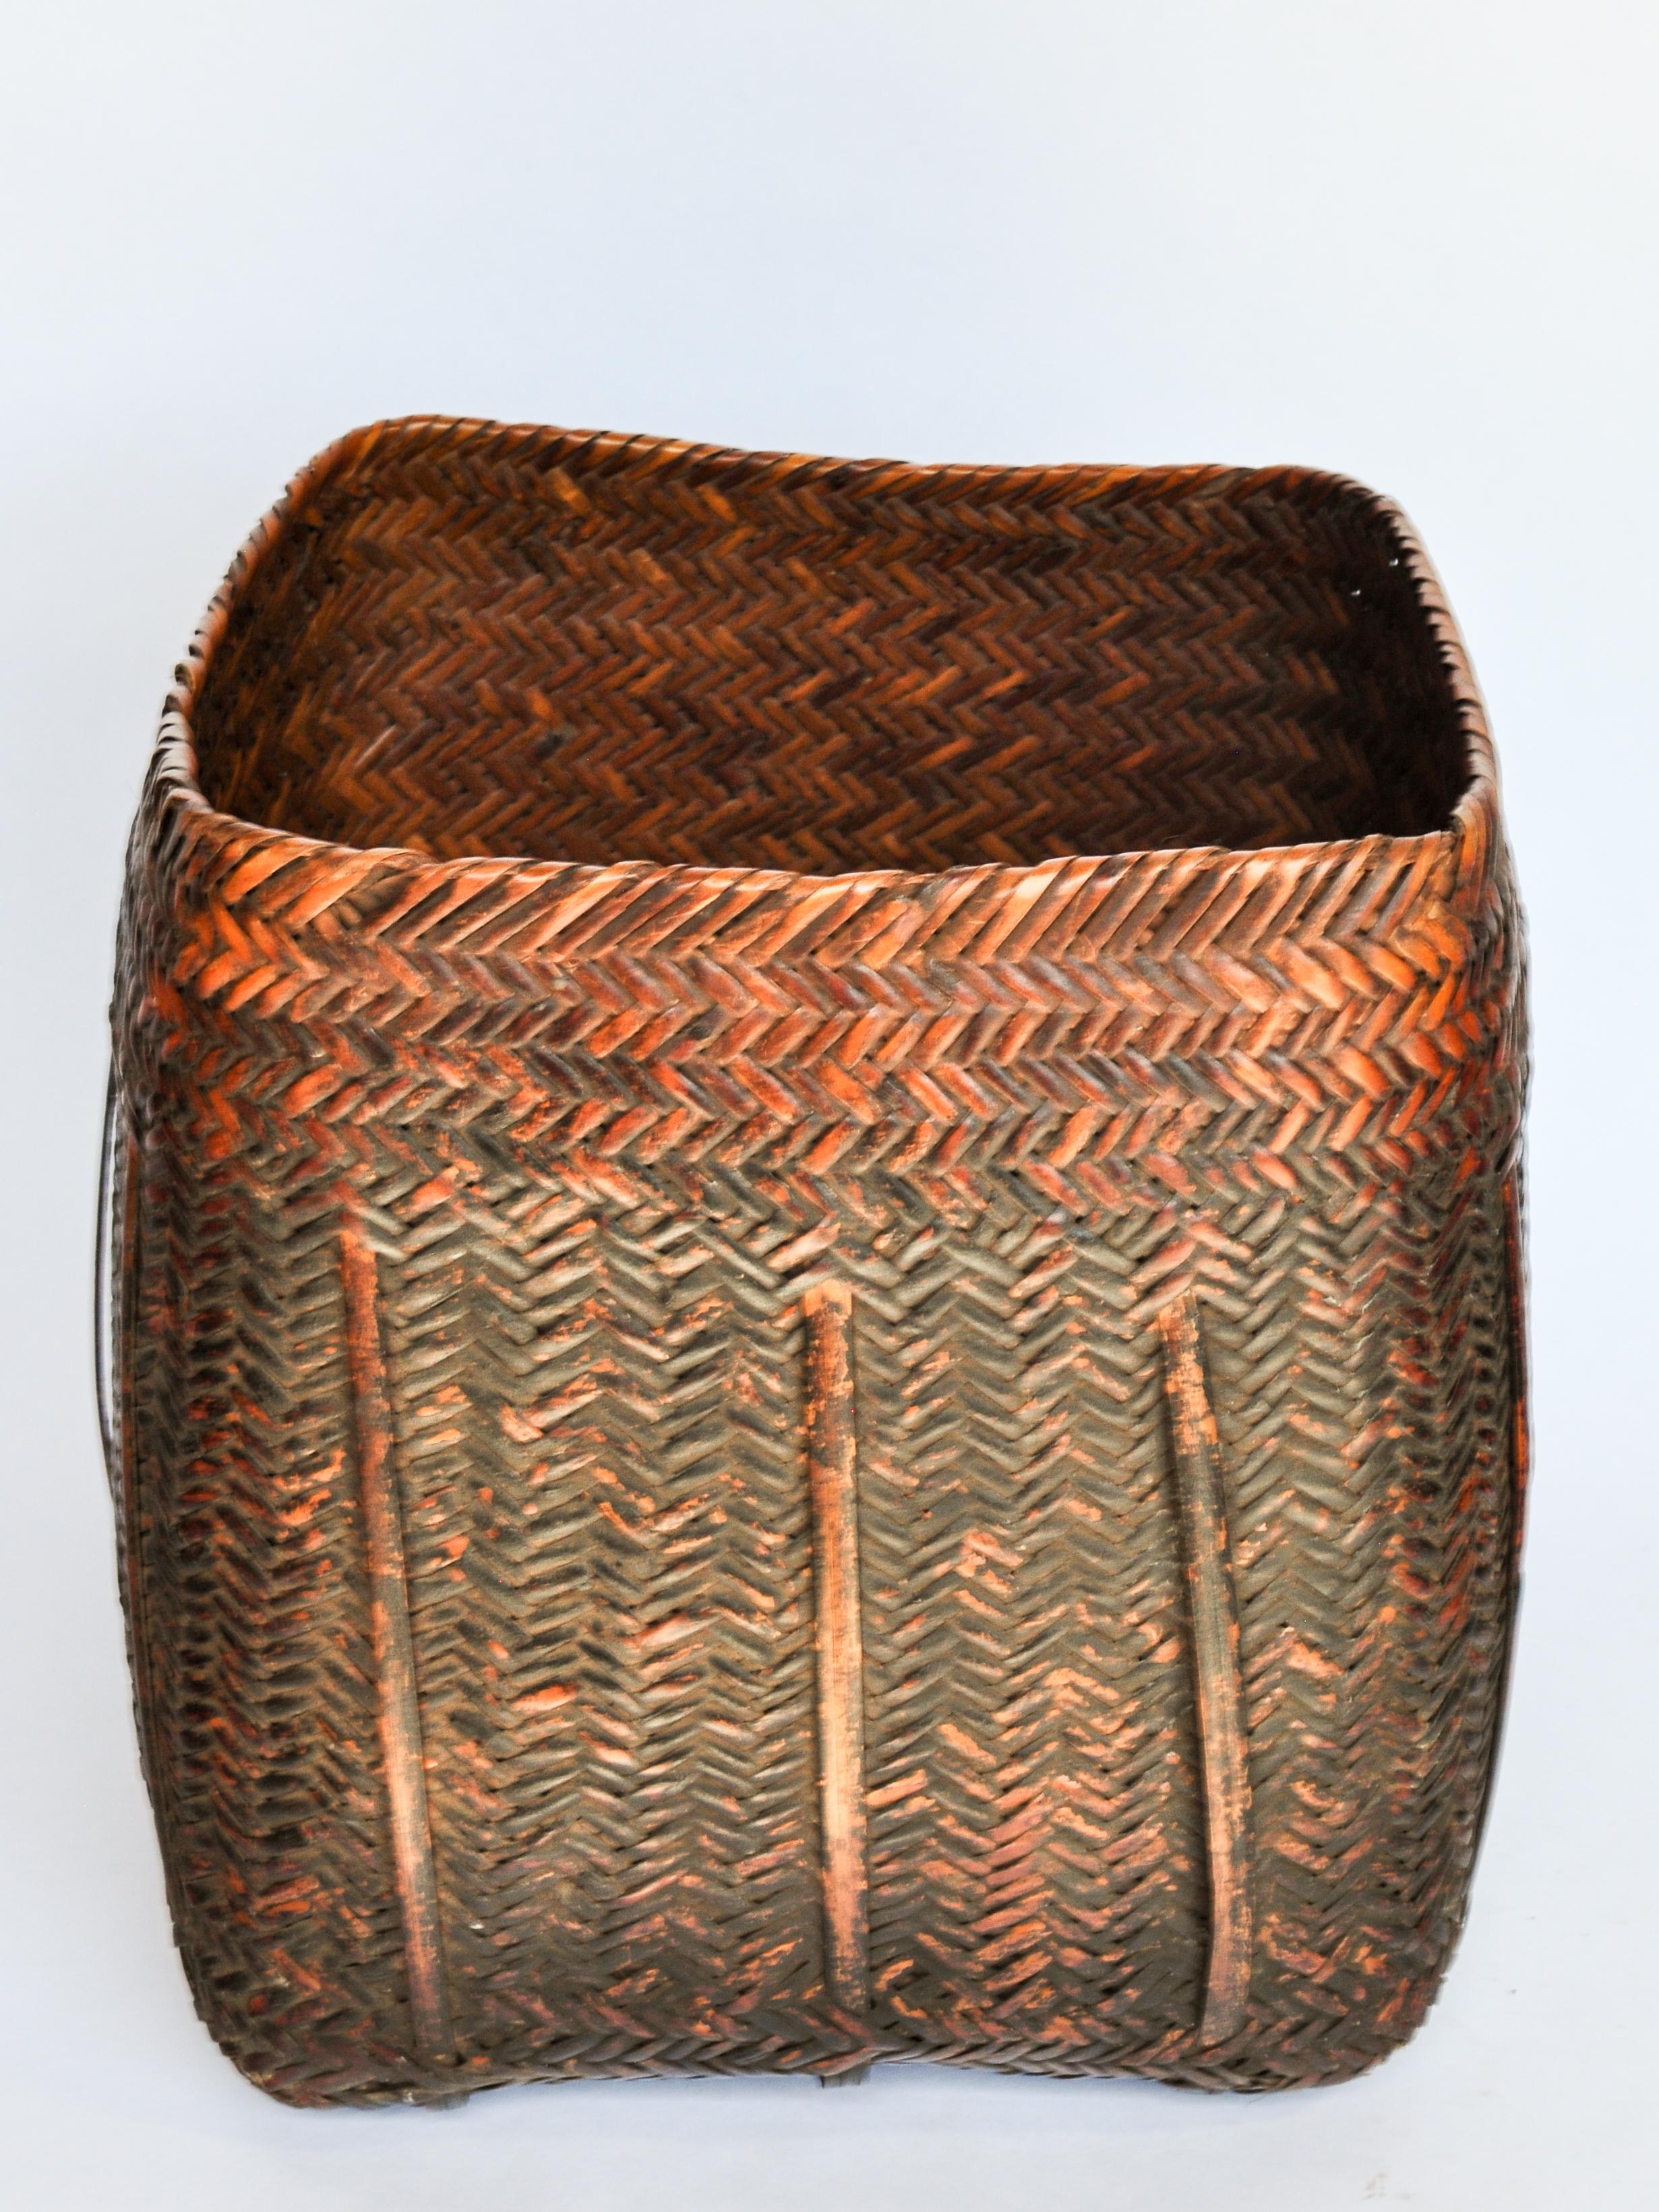 Rustic Tribal Storage Basket with Lid from the Tamang of Nepal, Mid-20th Century 2